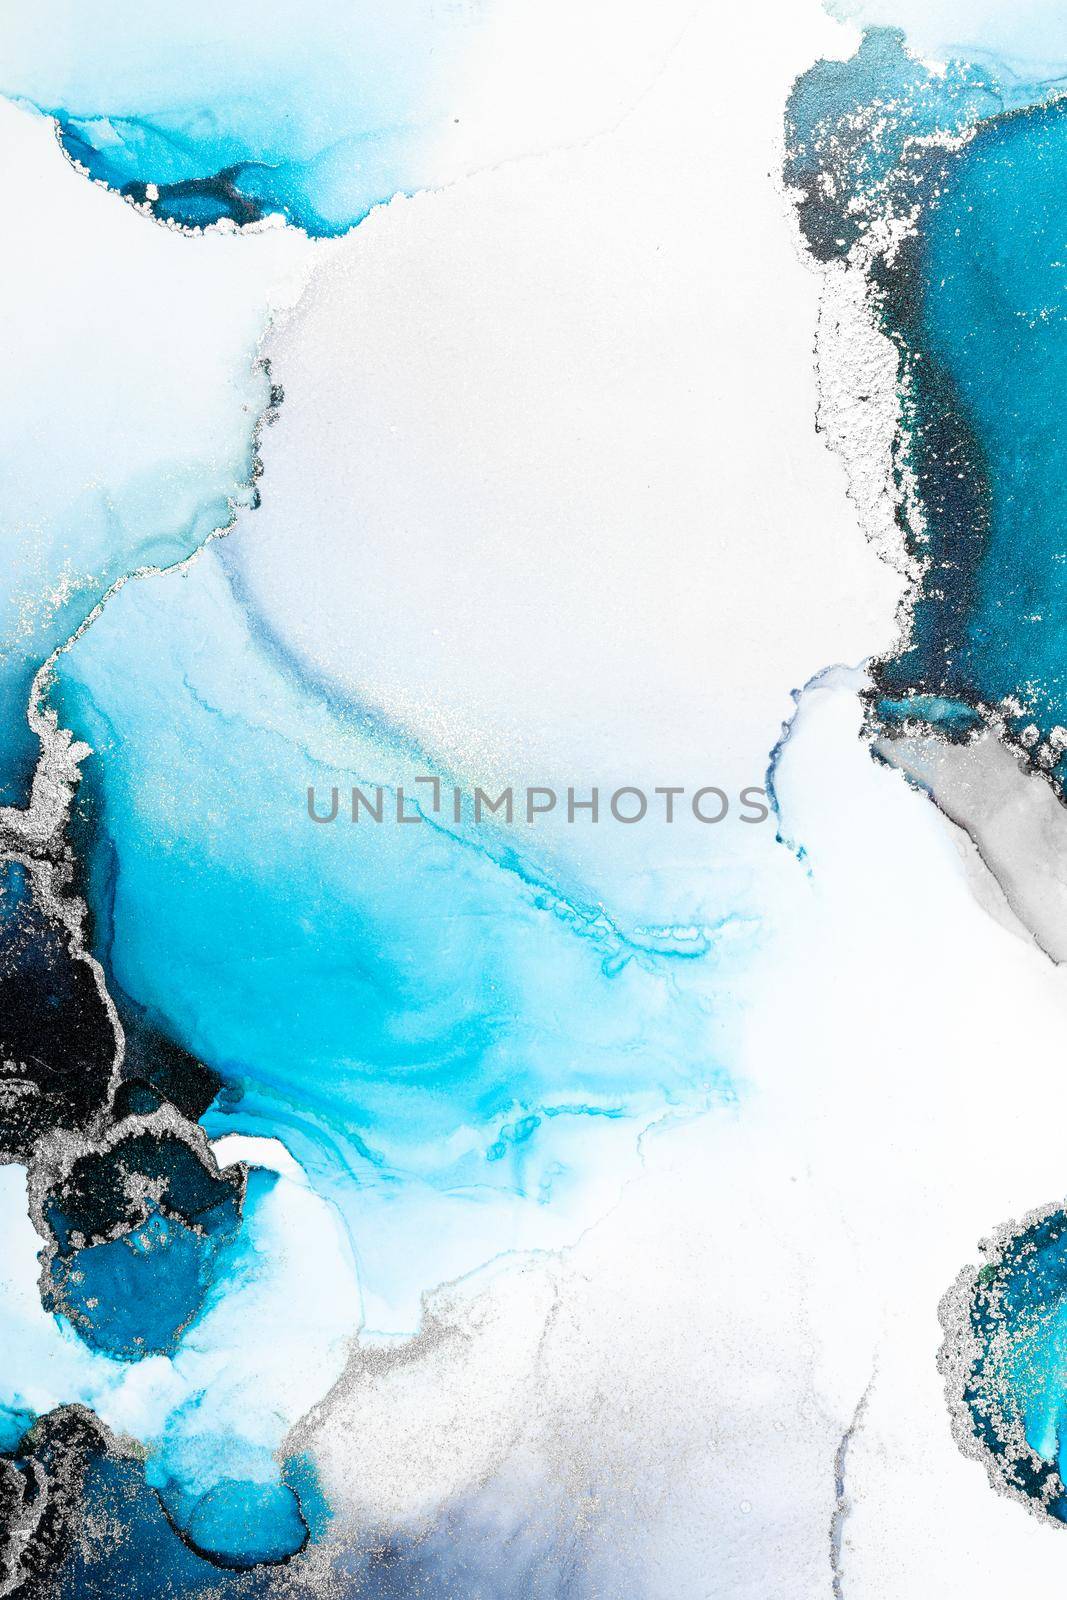 Blue silver abstract background of marble liquid ink art painting on paper . Image of original artwork watercolor alcohol ink paint on high quality paper texture .